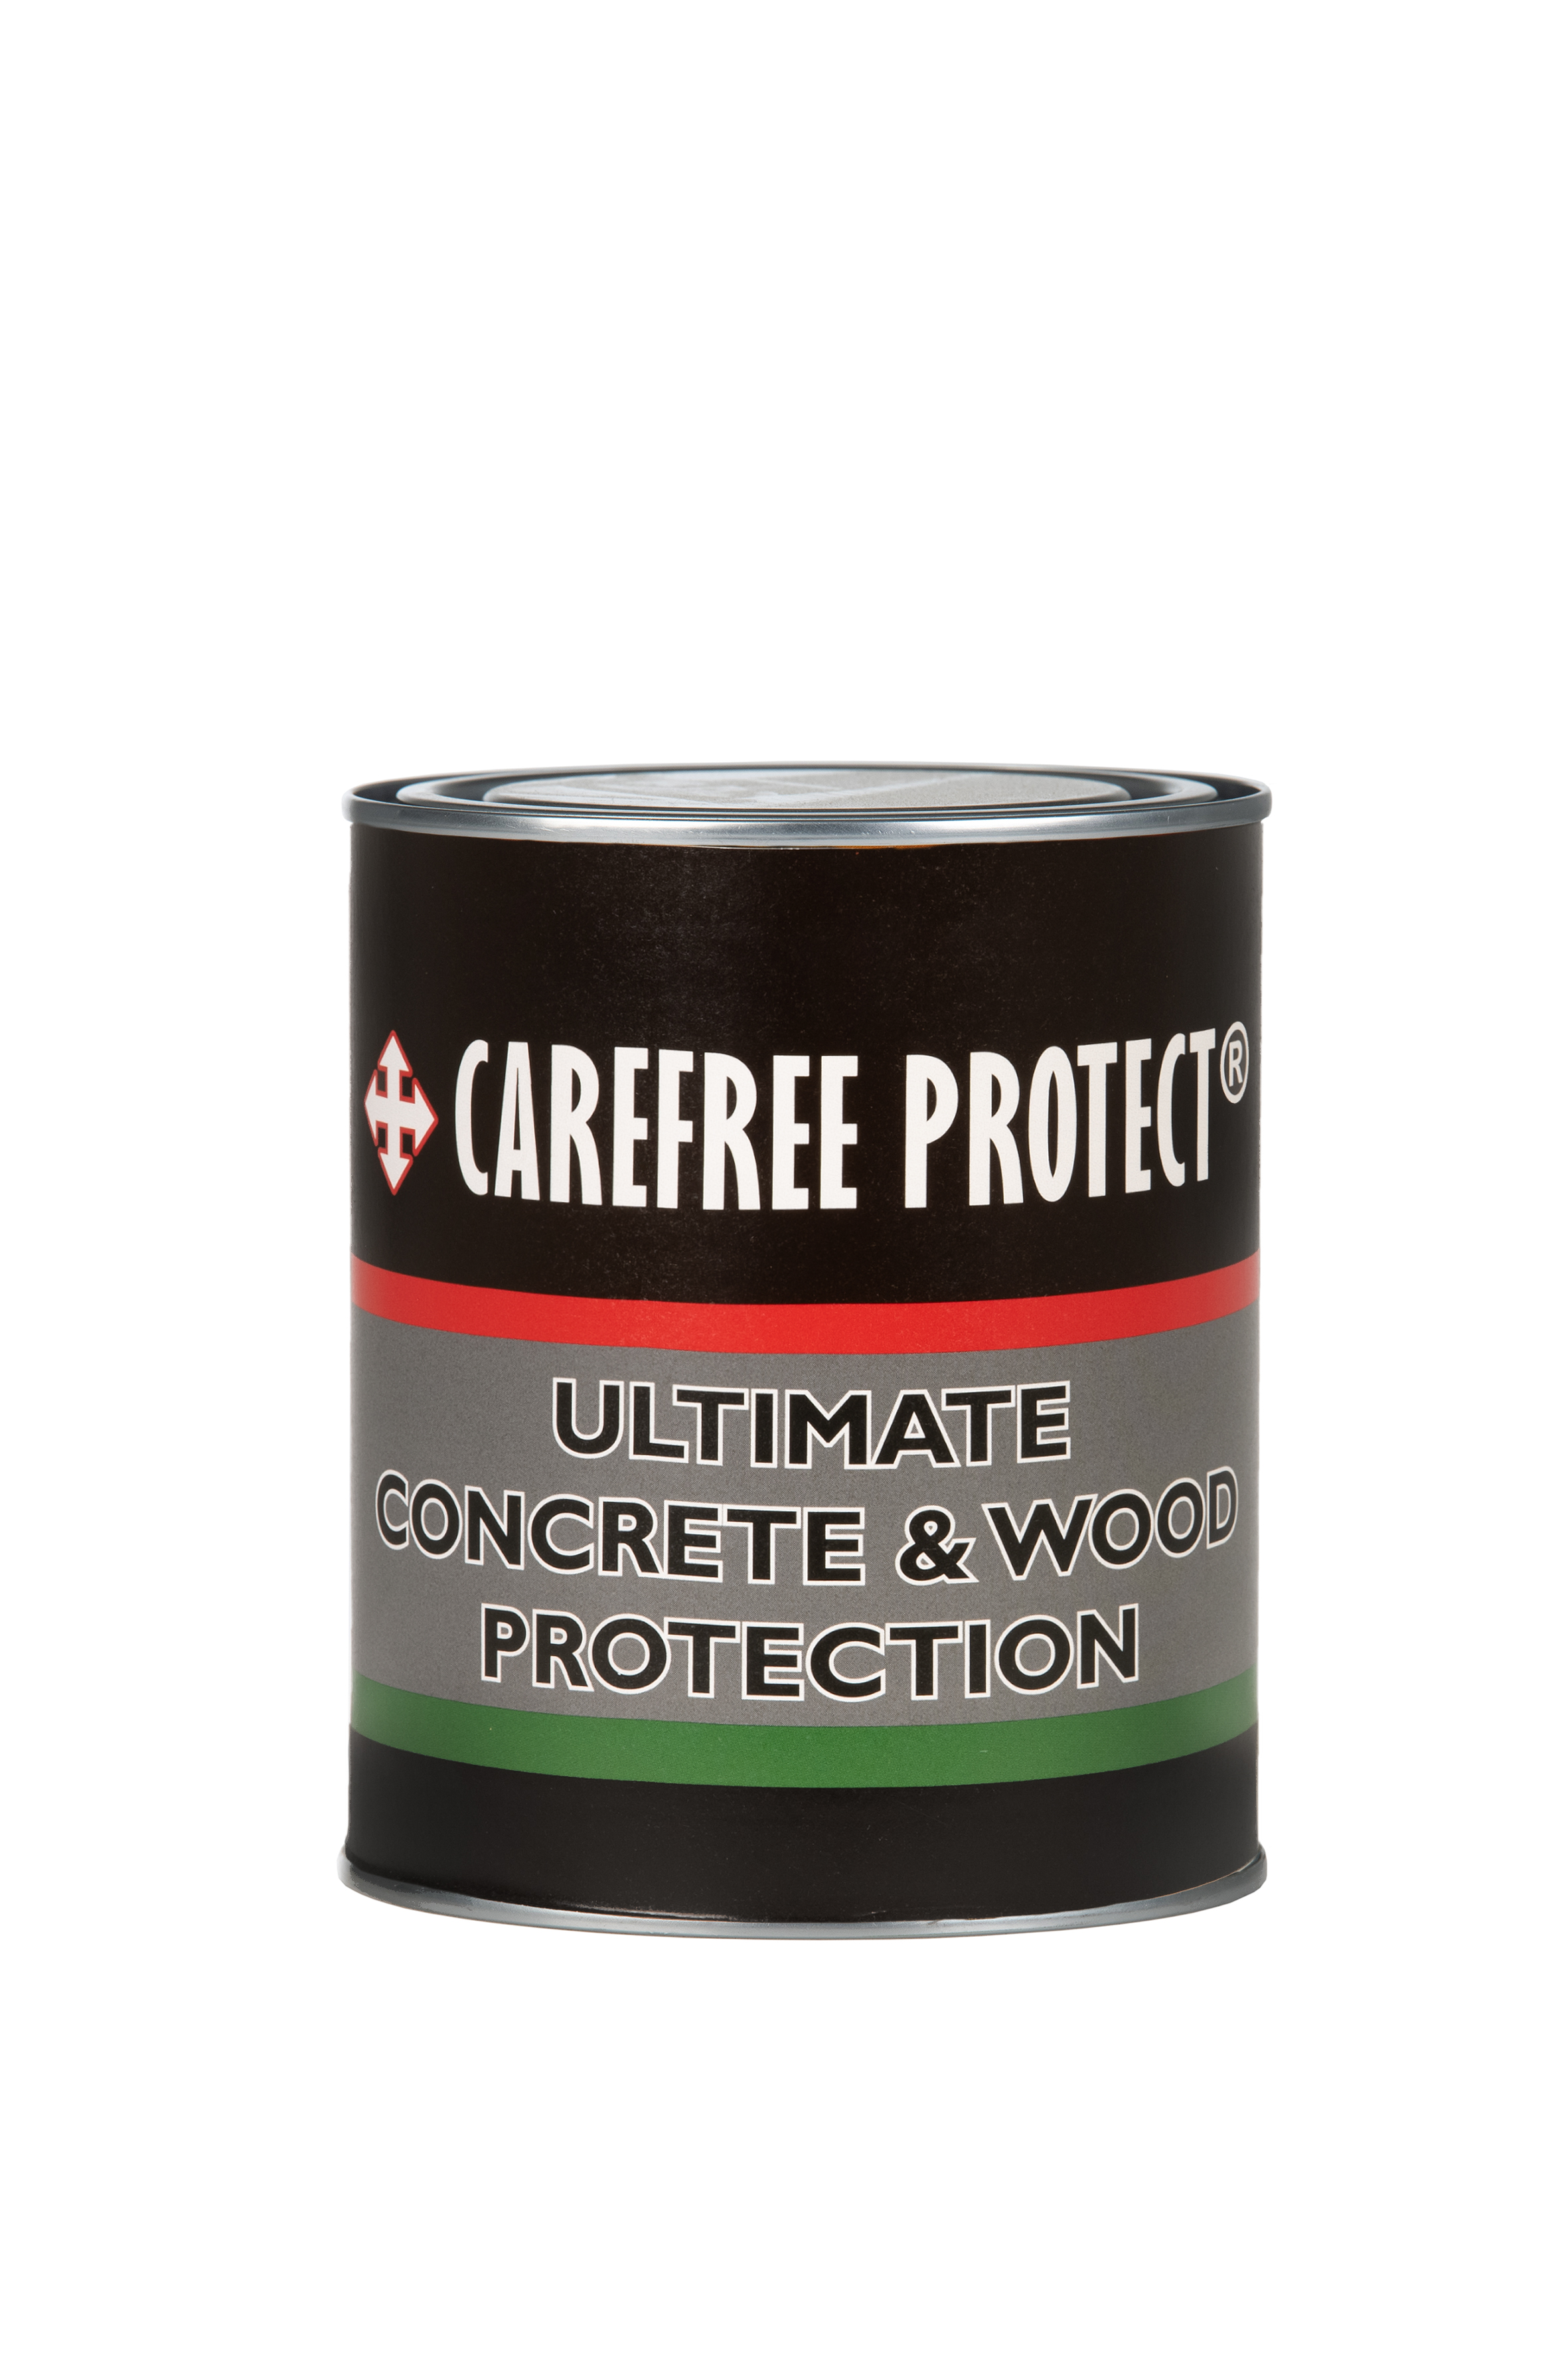 Carefree Protect rough wood white wash 0.75ltr white